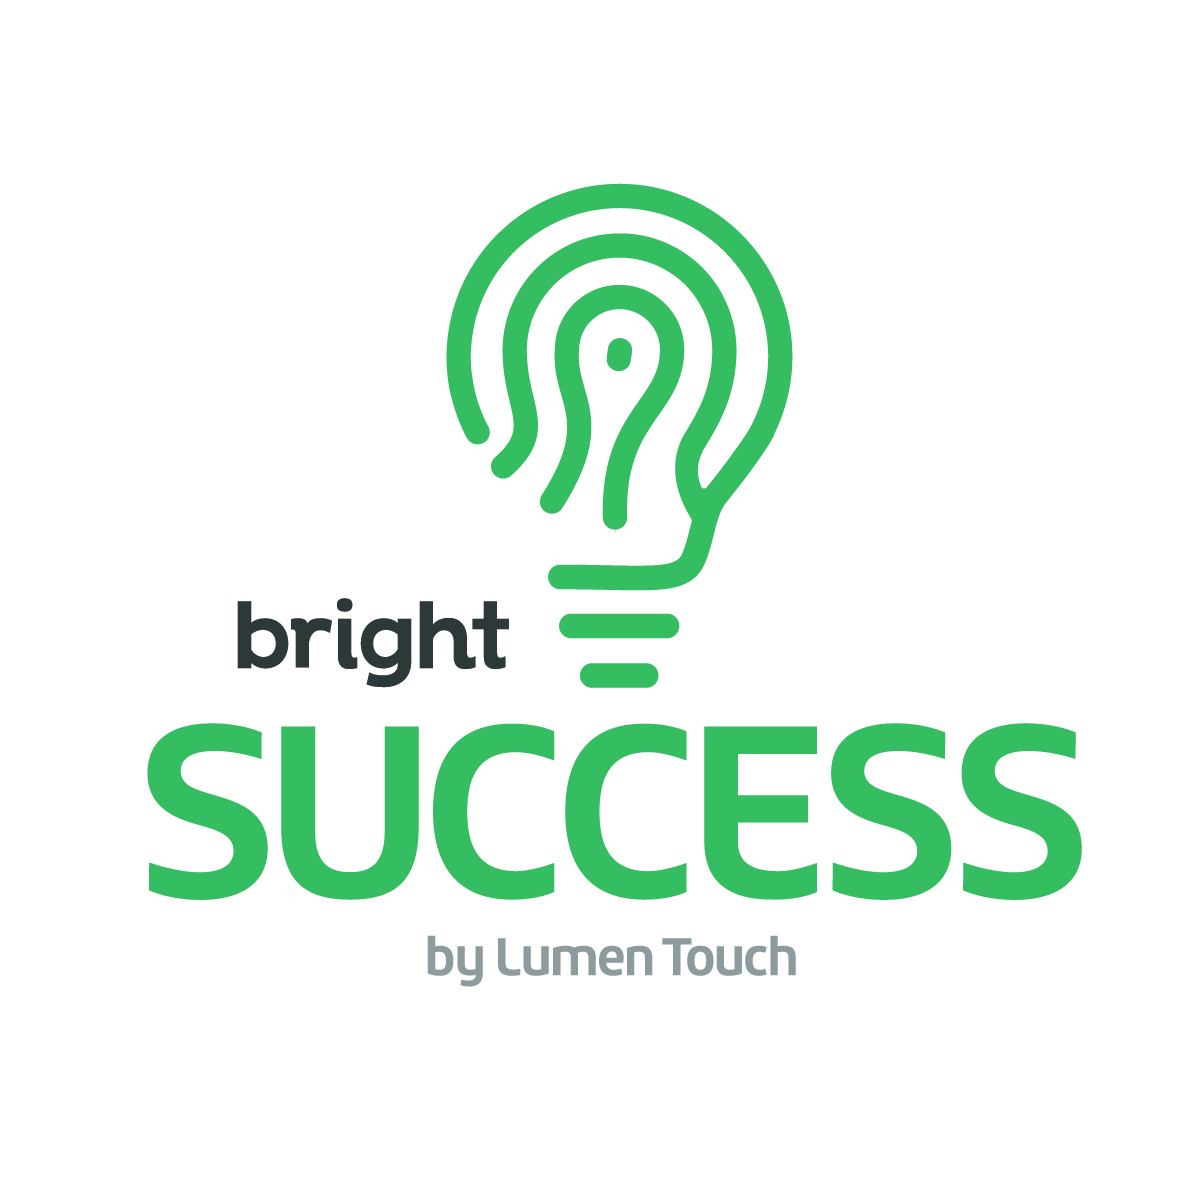 Bright Success by Lumen Touch